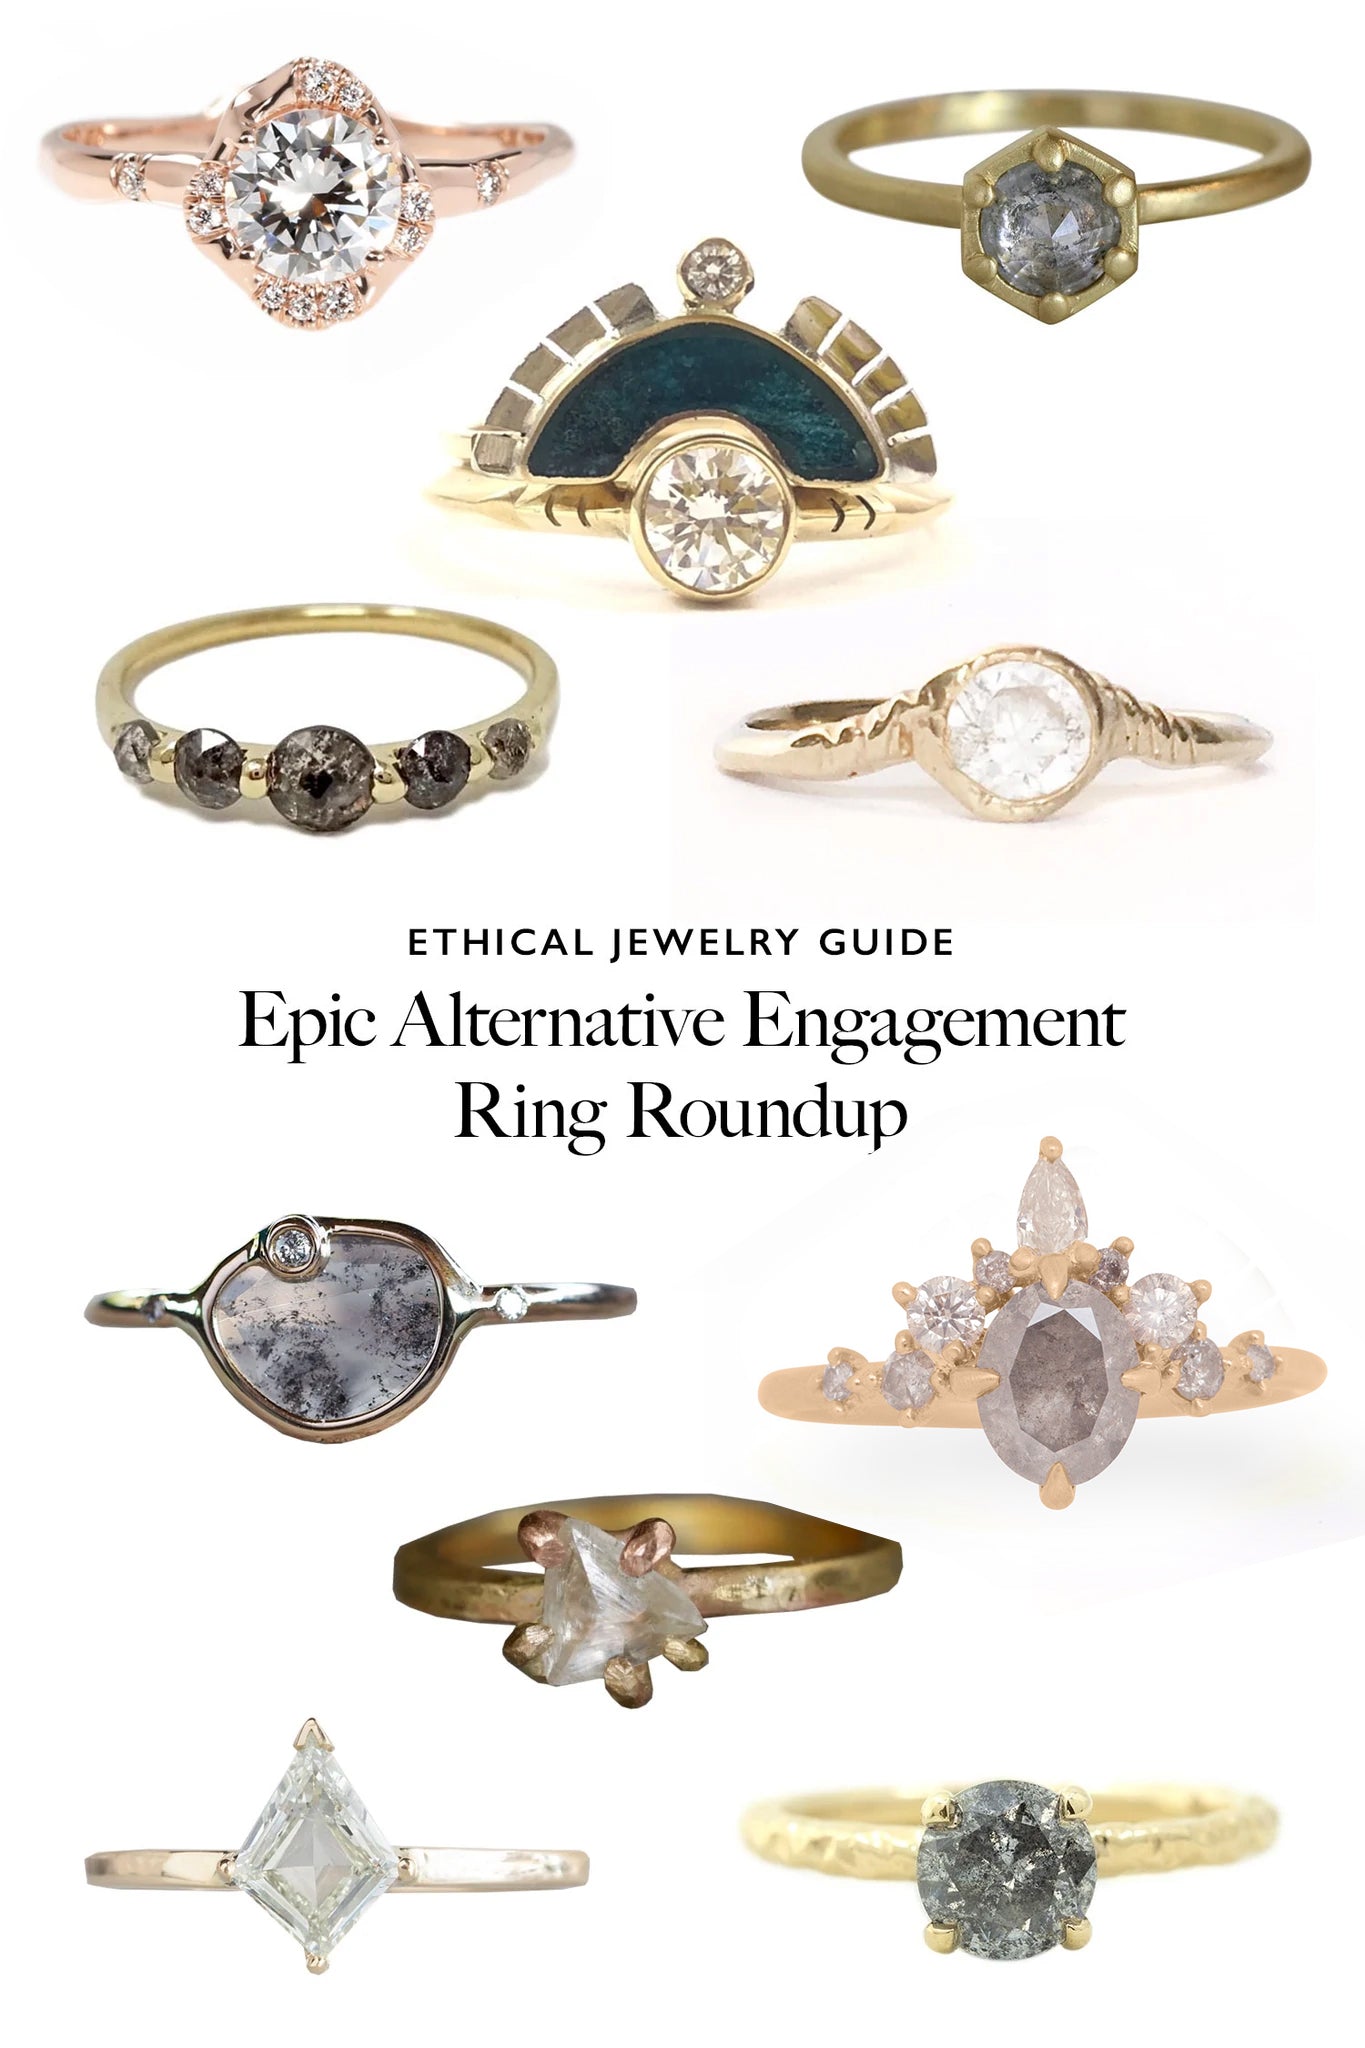 Top 10 Ethical Engagement Ring Roundup: The Most Epic & Conflict-Free Alternative Wedding Jewelry